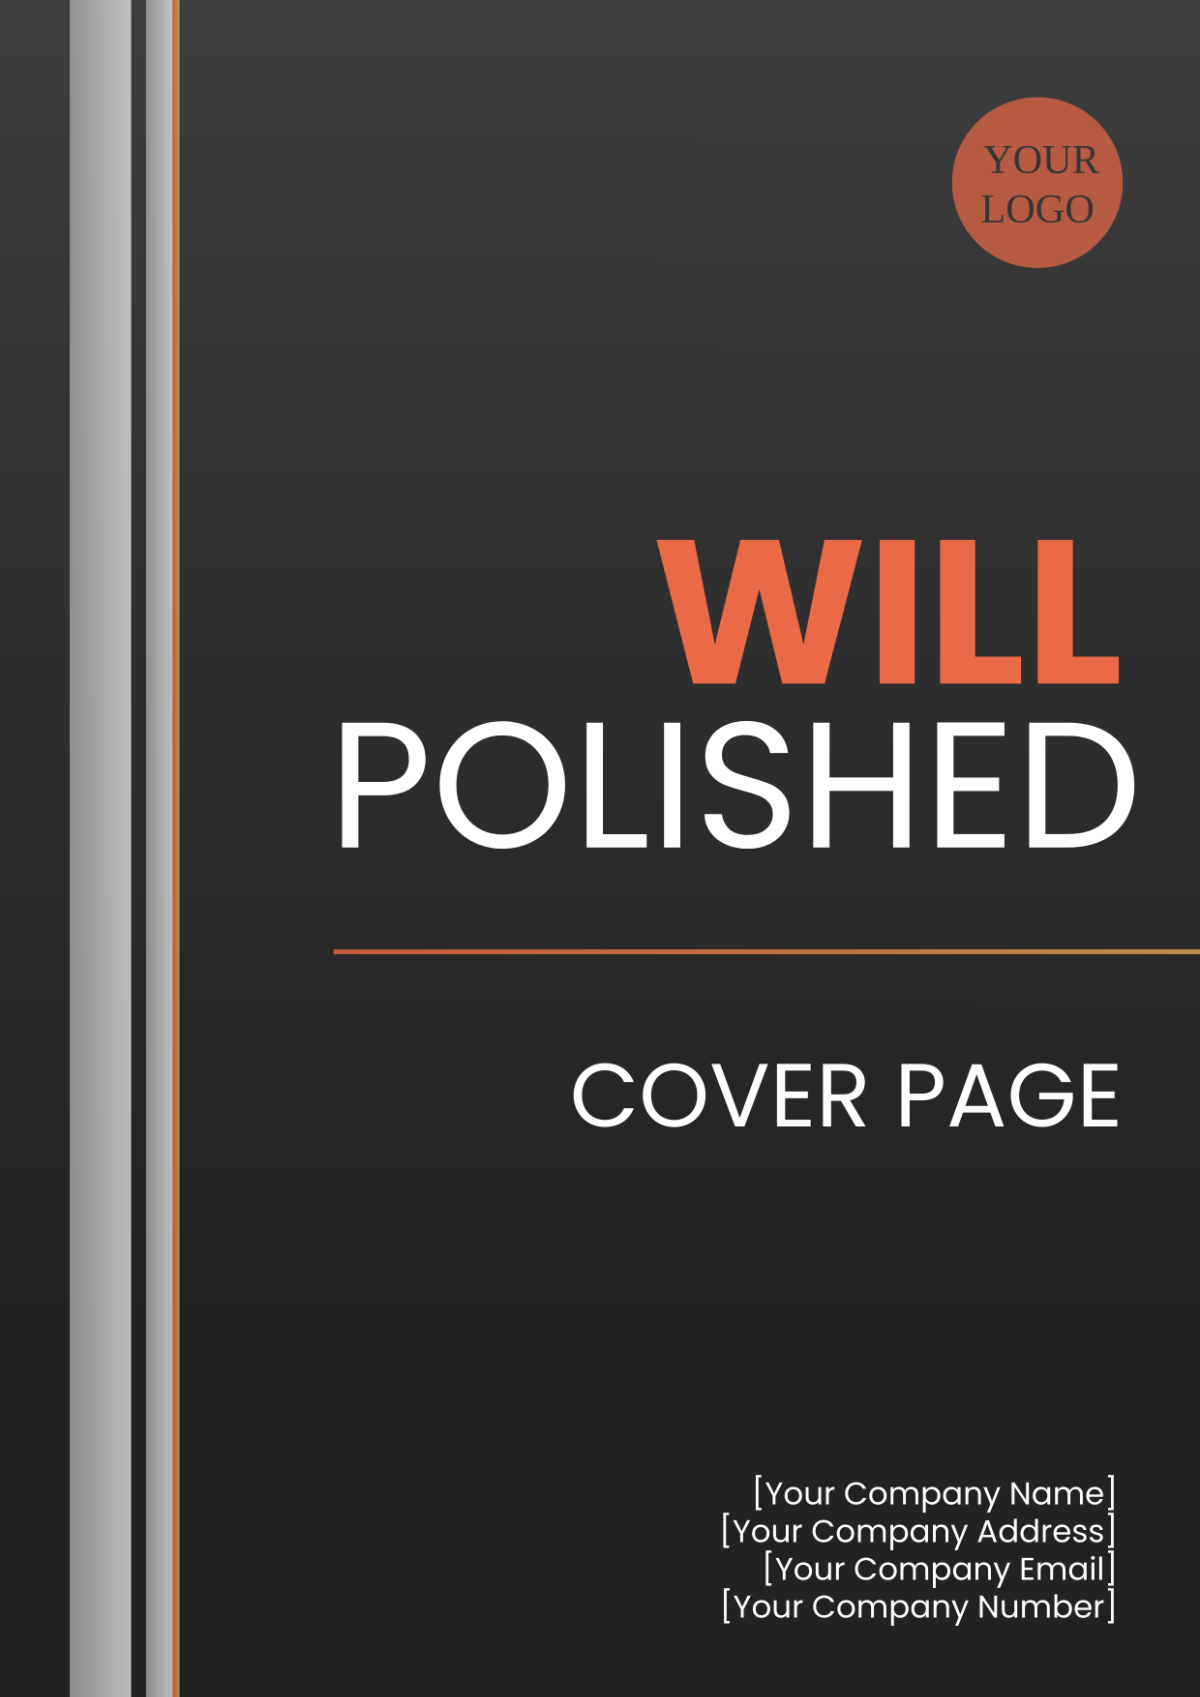 Will Polished Cover Page